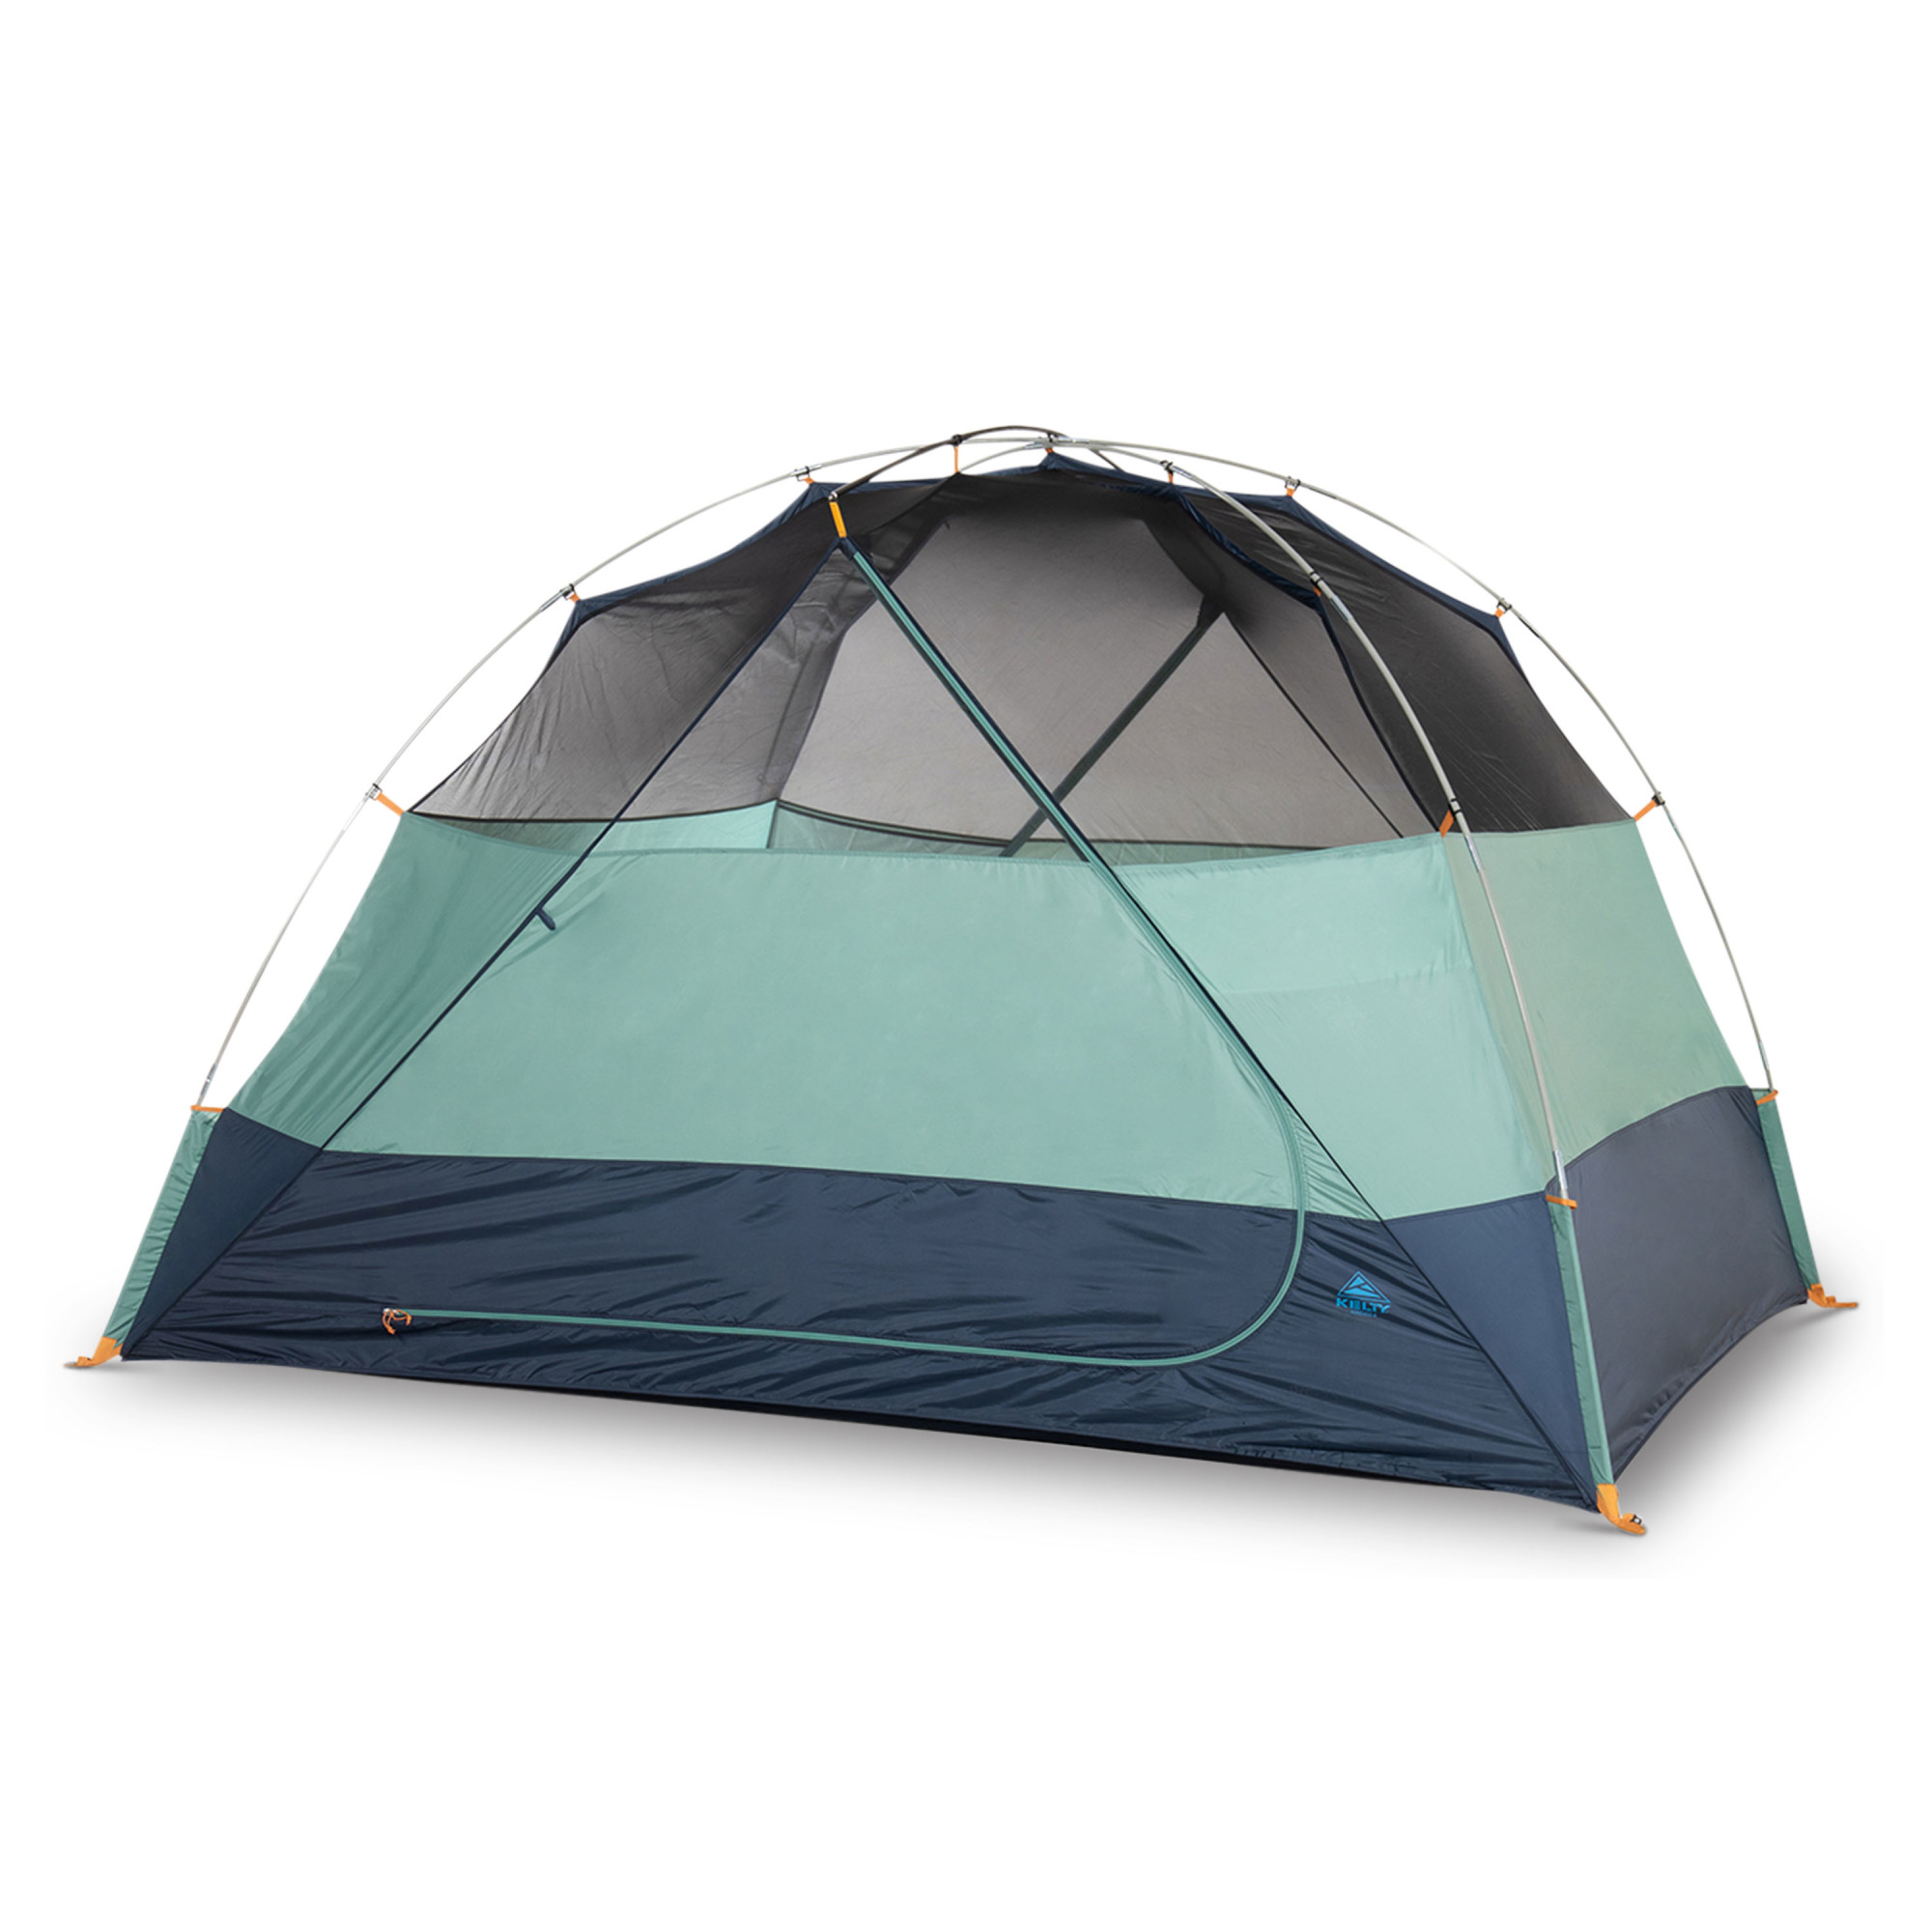 Kelty Wireless 4 tent, green, shown without fly